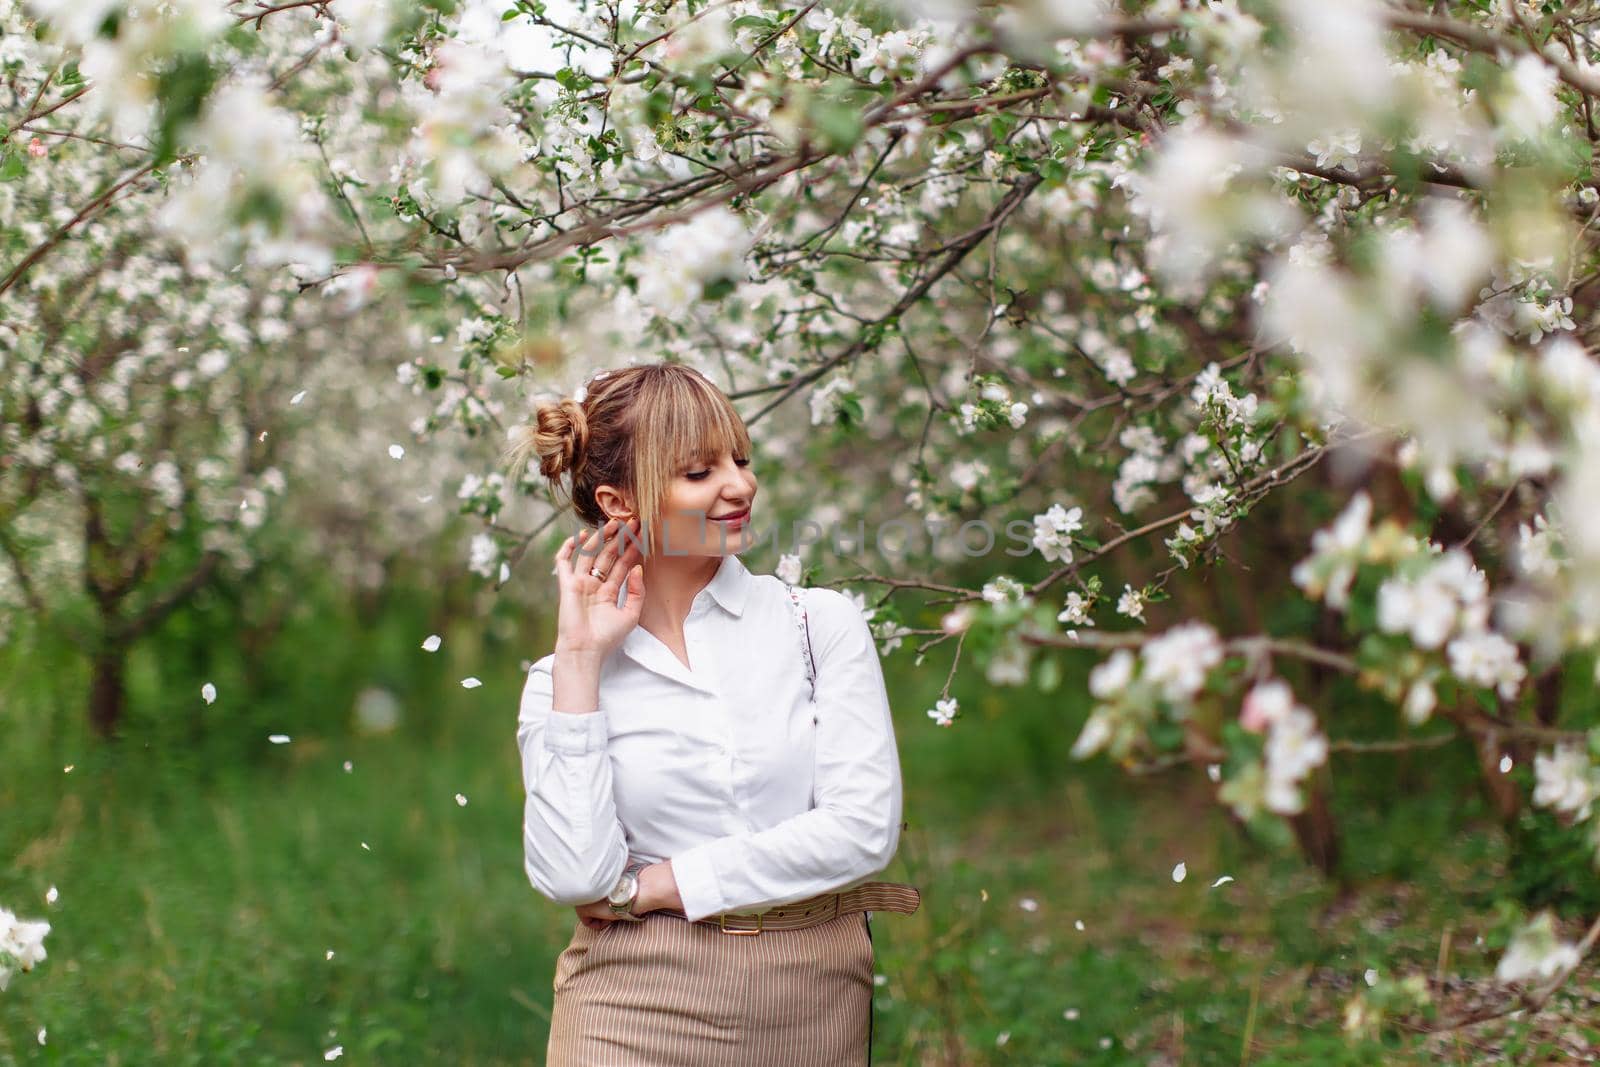 Beautiful young blonde woman in white shirt posing under apple tree in blossom in Spring garden by OnPhotoUa